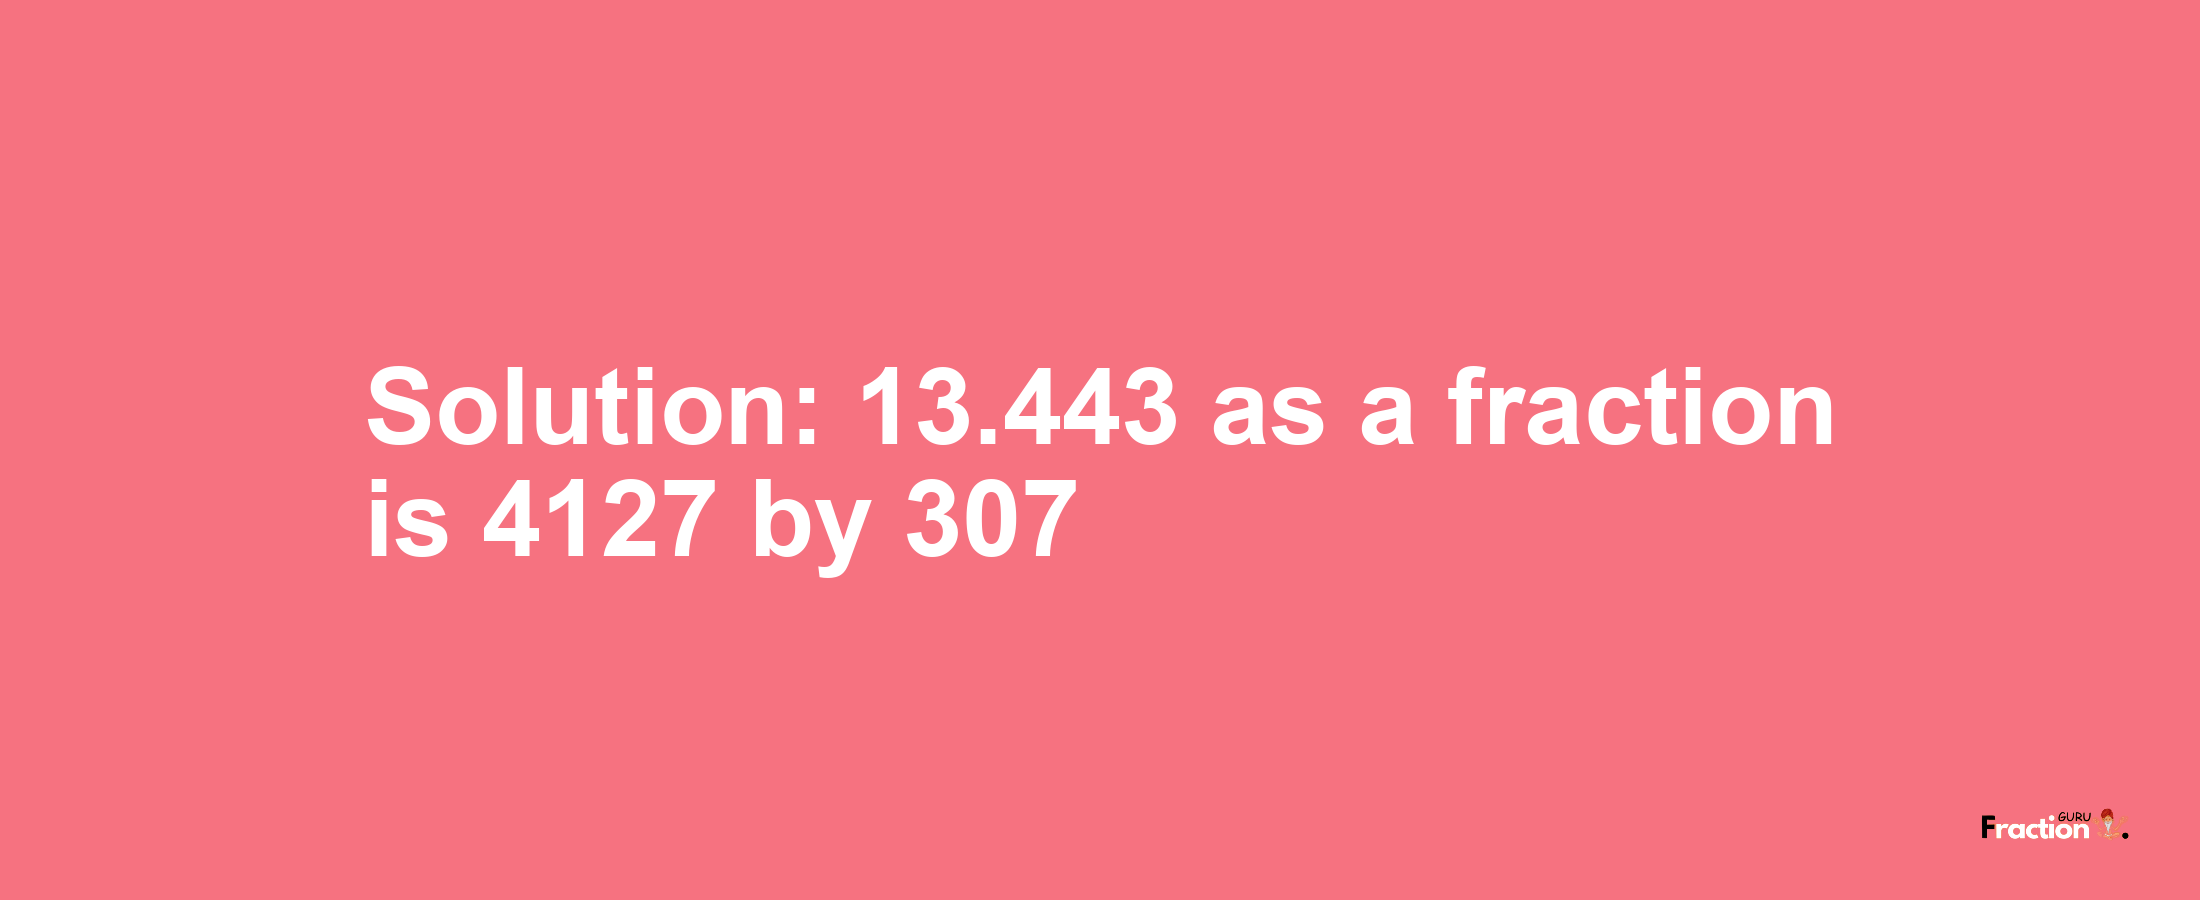 Solution:13.443 as a fraction is 4127/307